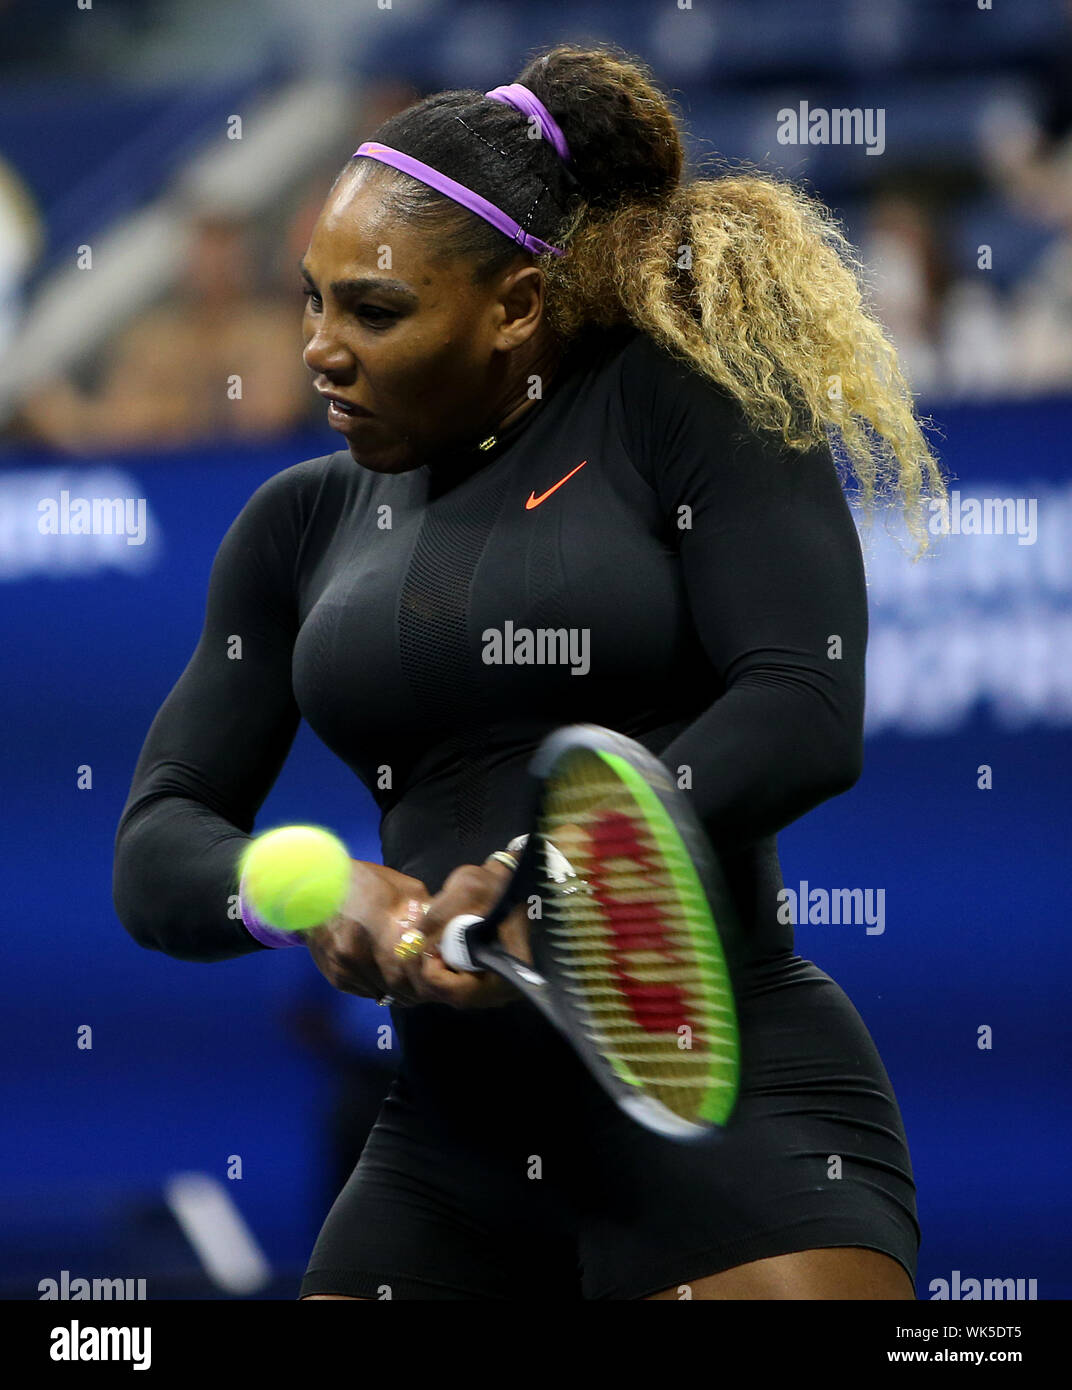 3 september 2019 New York, USA Tennis US Open 2019  03-09-2019: Tennis: US Open 2019: New York USA, New York, Flushing, Flushing Meadow - Corona Park, USTA Billie Jean King National Tennis Center -  US Open 2019 - DAY 9 - 03/09/2019  No.8 Seed the American player Serena Williams  (USA) pictured during her Quarterfinal match against Qiang Wang (CHN) in New York , Flushing Meadow- Corona Park at US Open 2019 Stock Photo